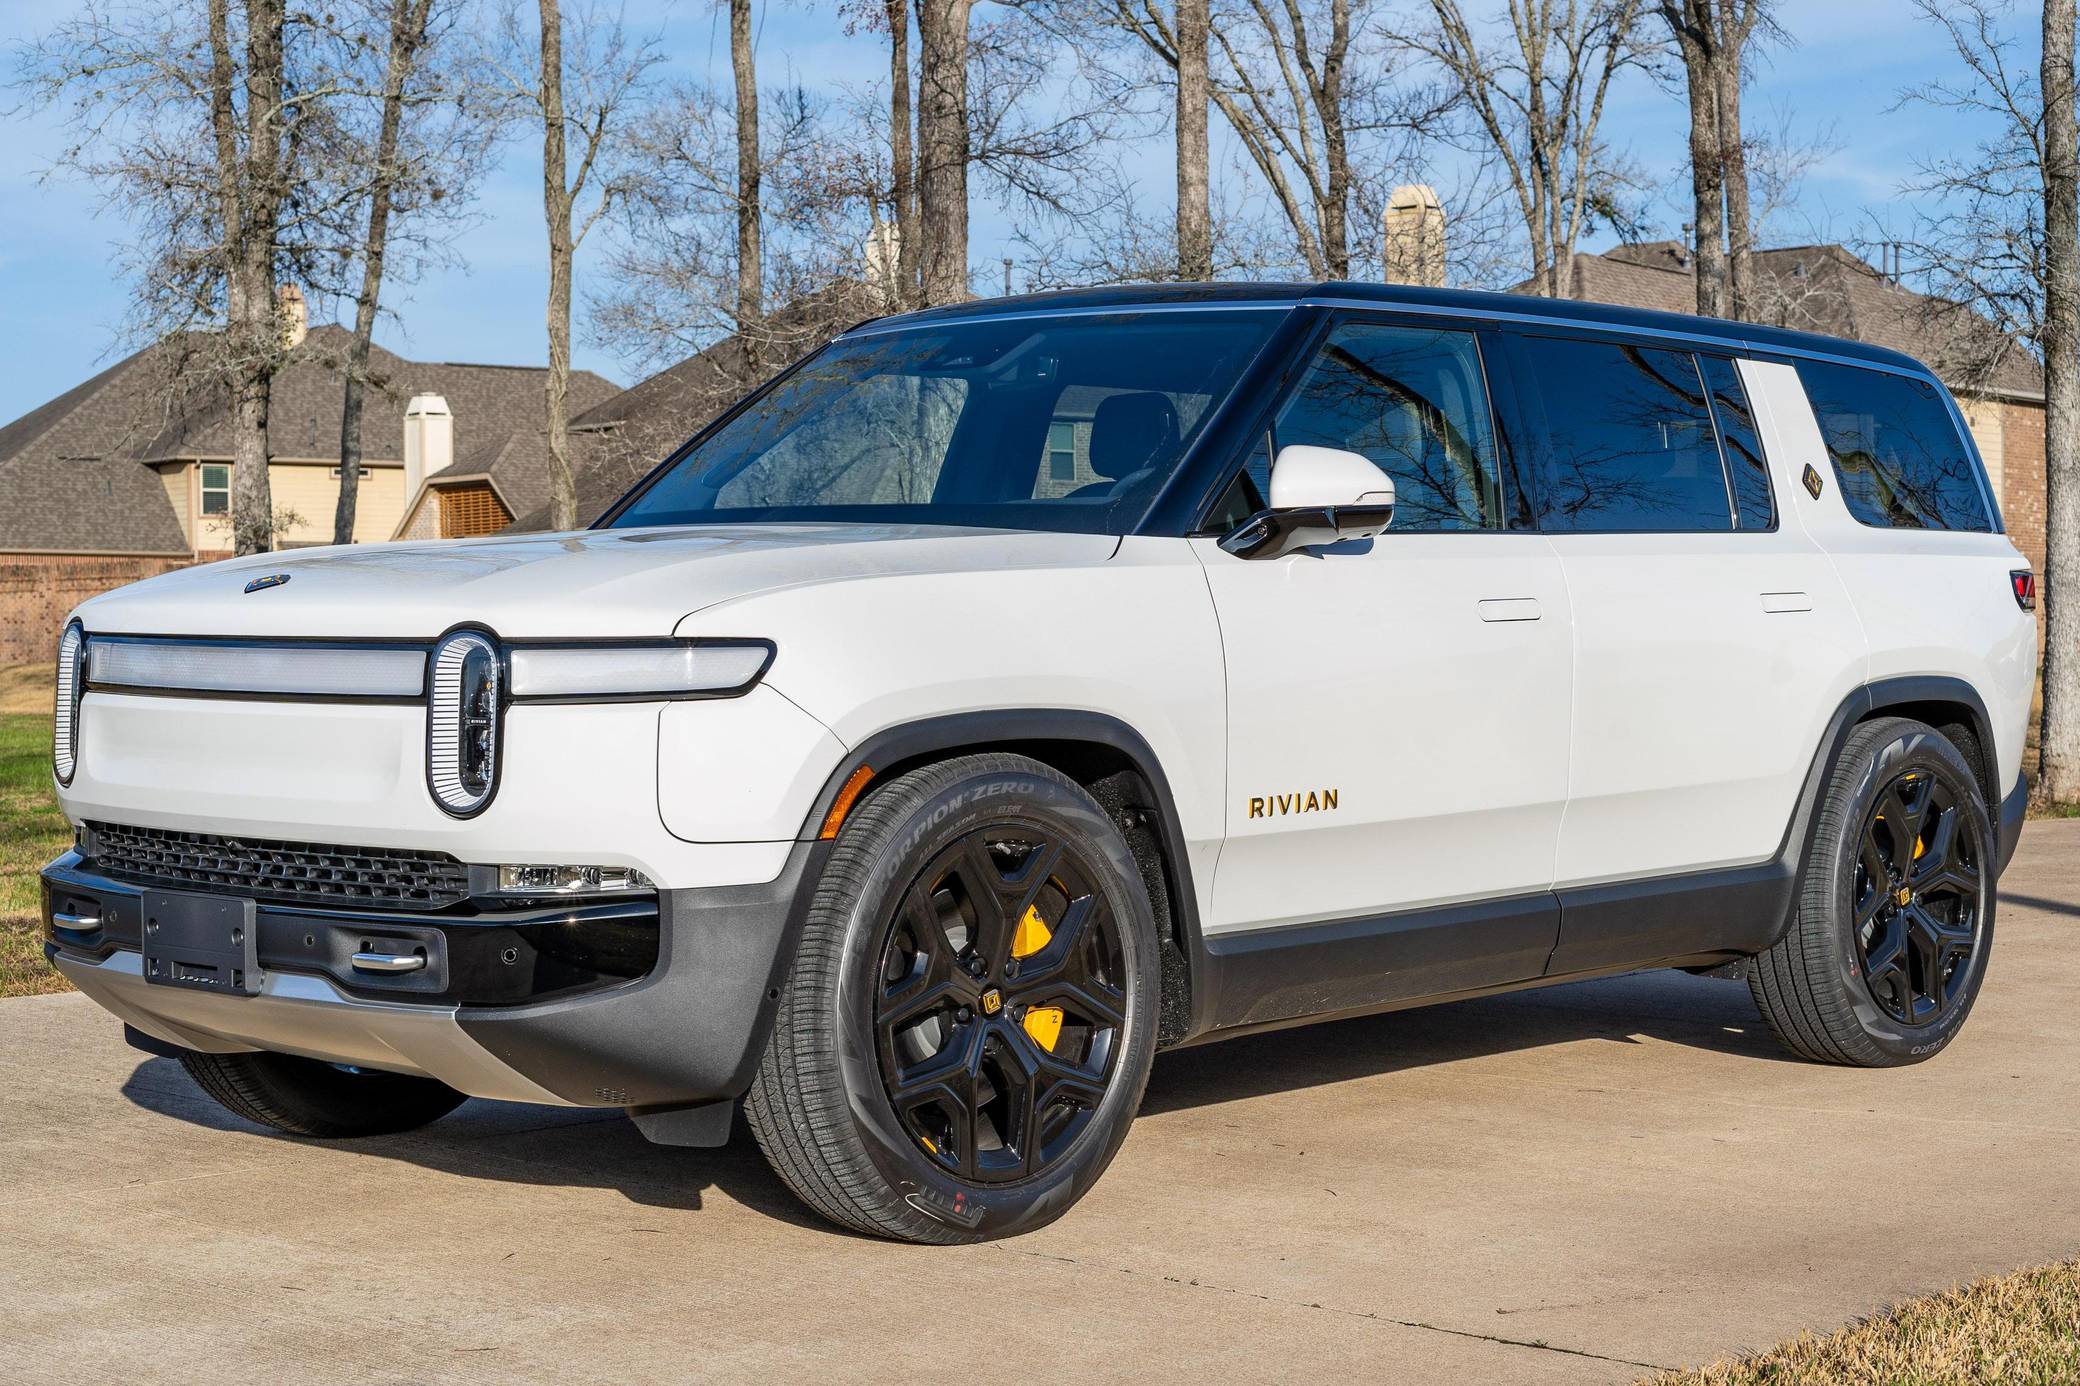 Last Chance to Get the Rivian R1S Launch Edition - Auction Ending Soon